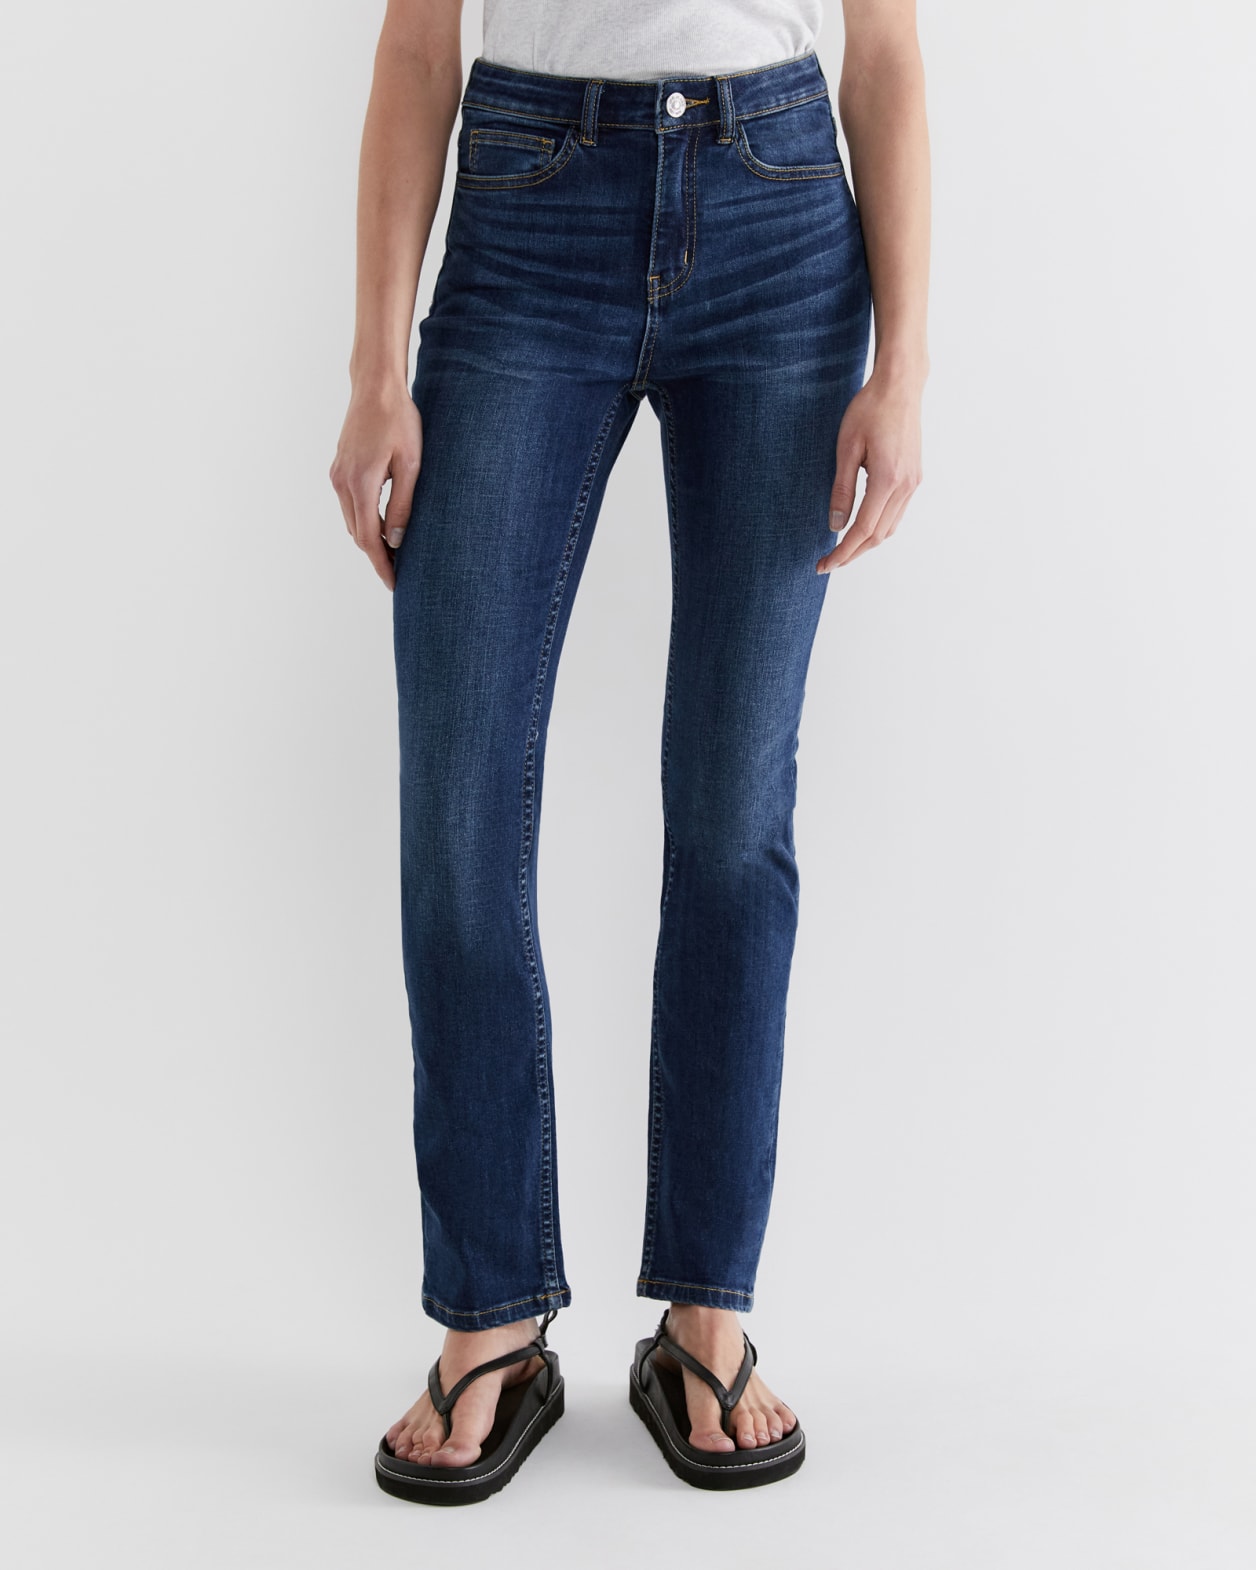 Bianca Slim Straight Jeans in BALTIC